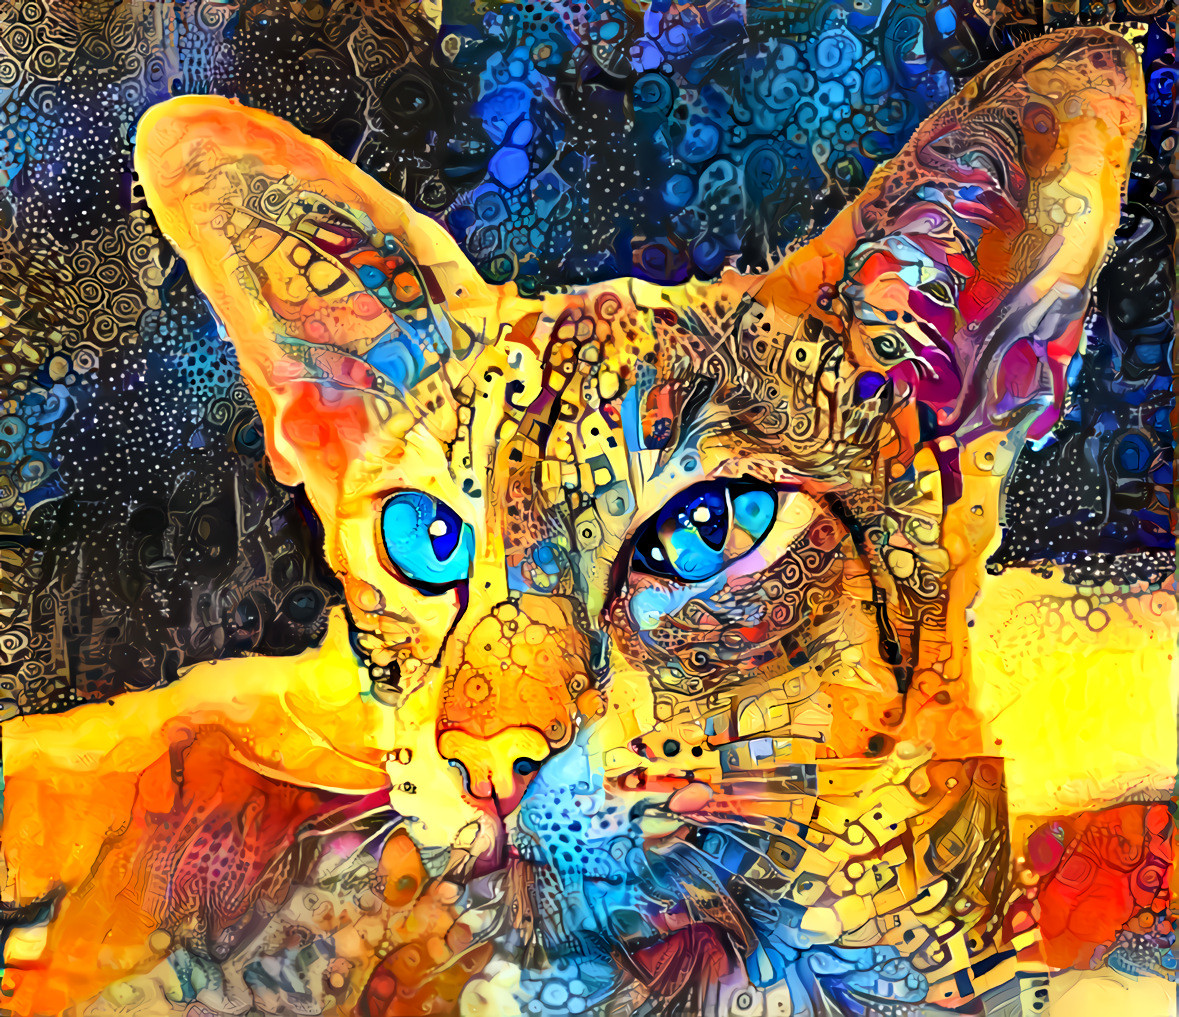 Colourful Cat (Original image by Tania Van den Berghen from Pixabay)